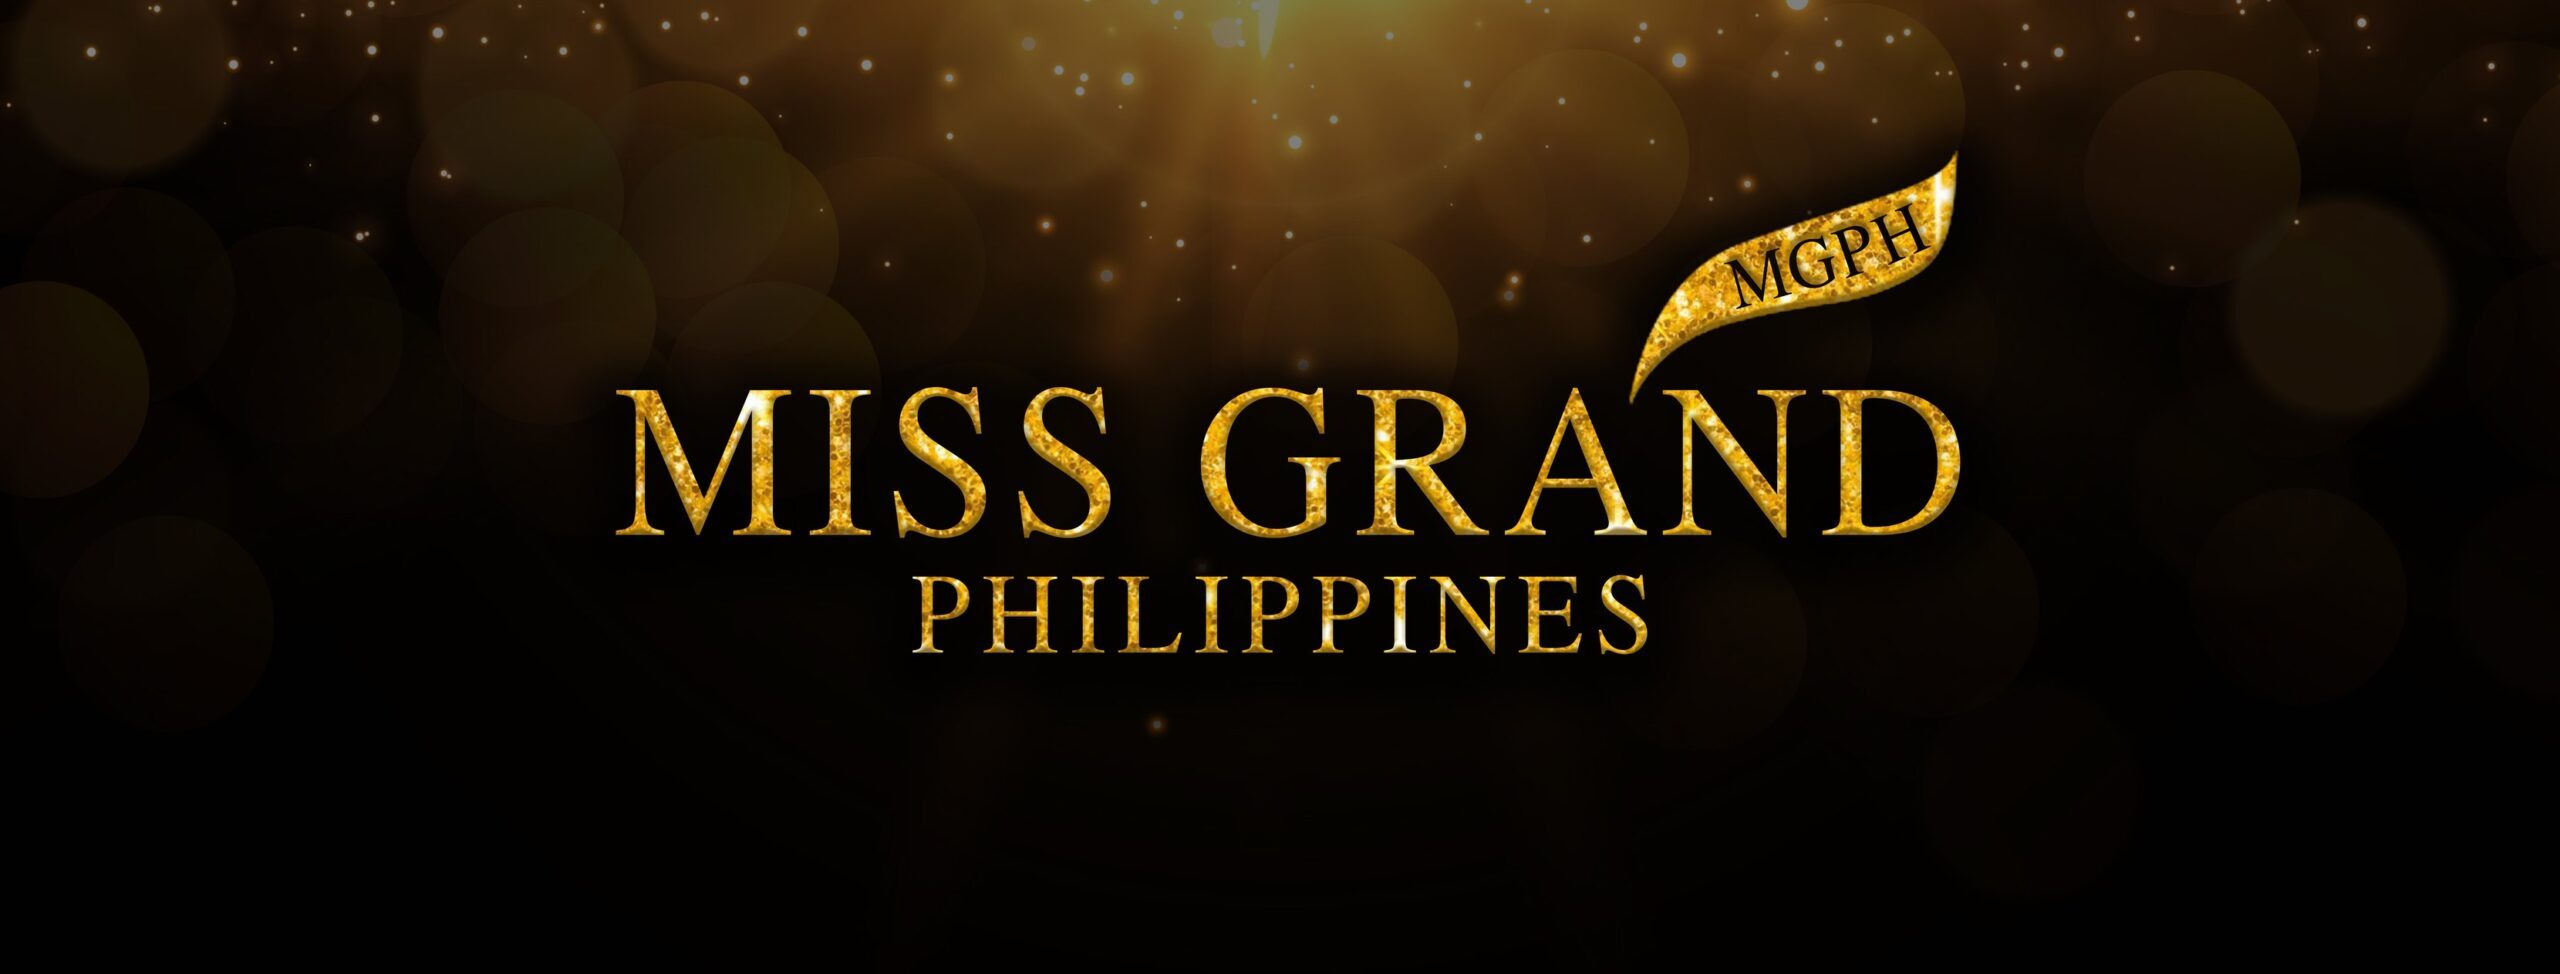 LOOK: Miss Grand Philippines teases 2 crowns